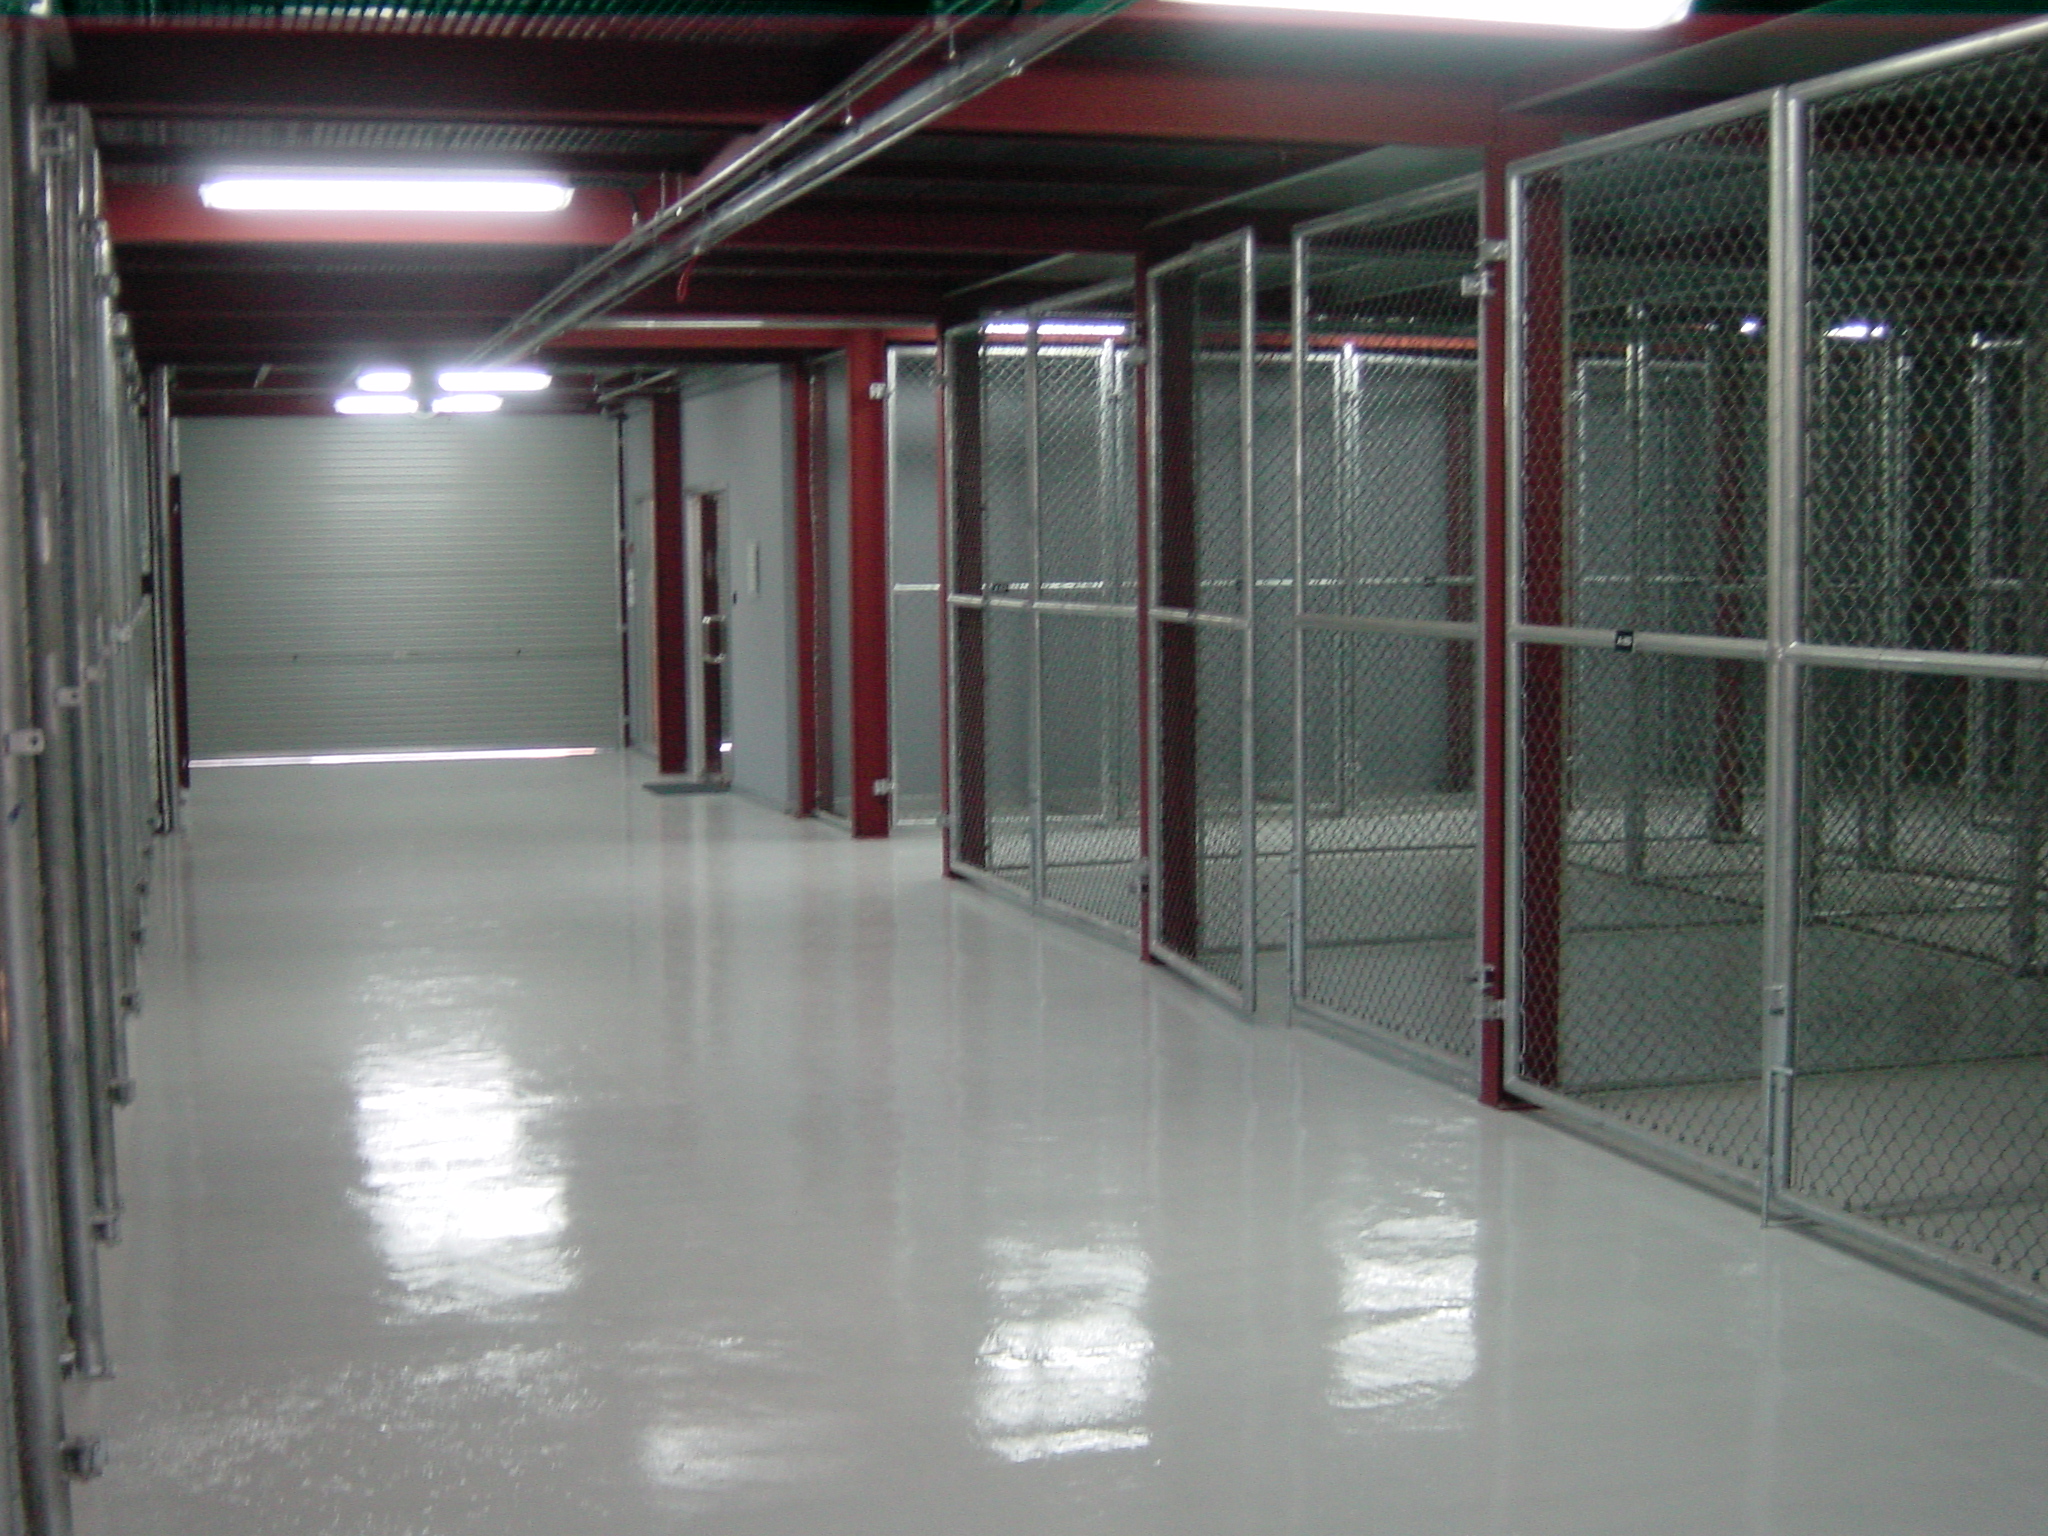 Questions to Ask when Choosing a Storage Facility